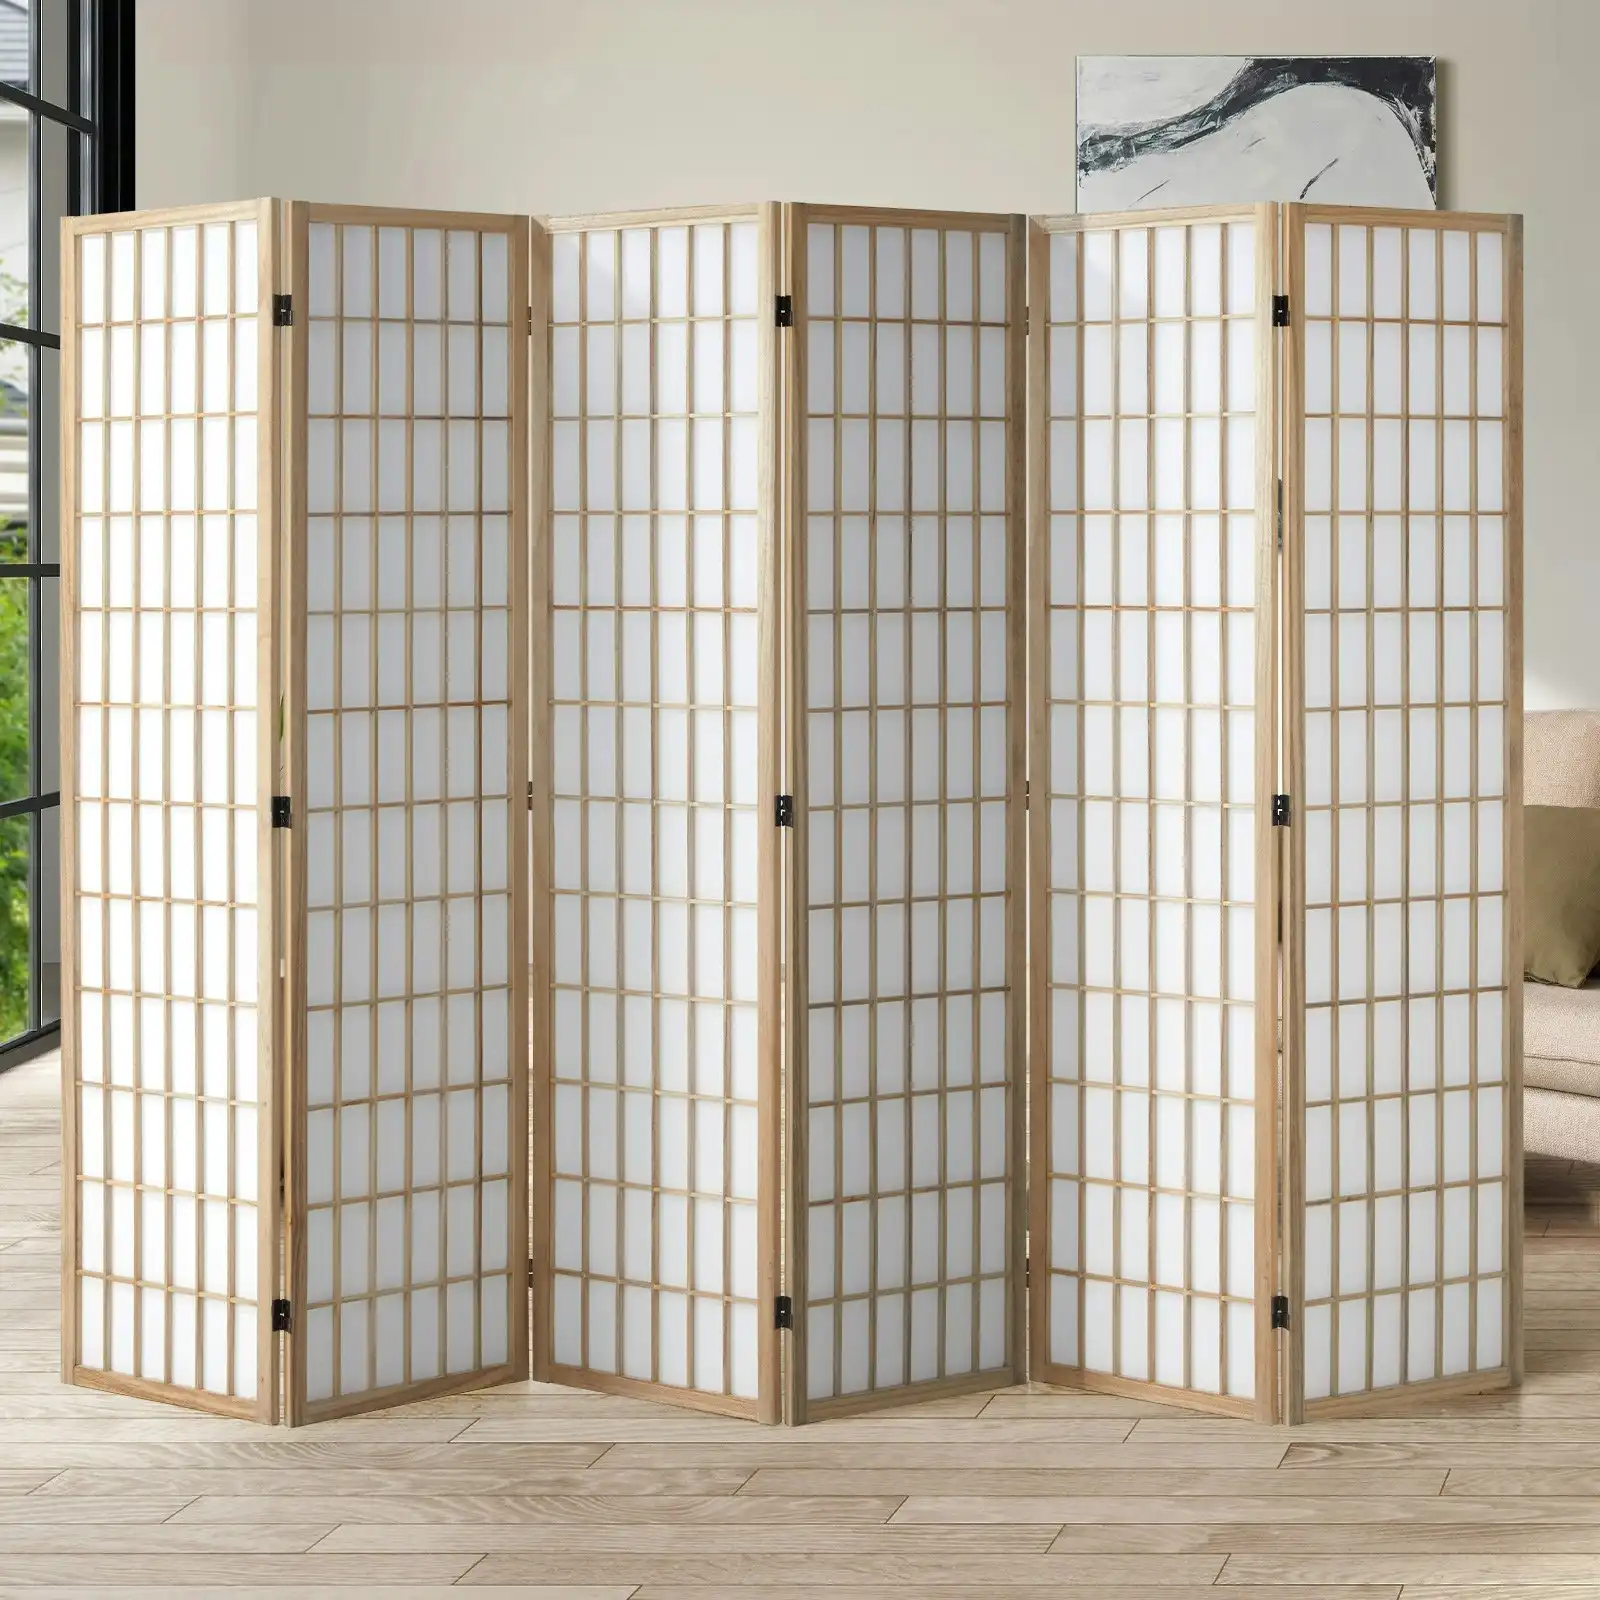 Oikiture 6 Panel Room Divider Privacy Screen Partition Timber Farbic Natural